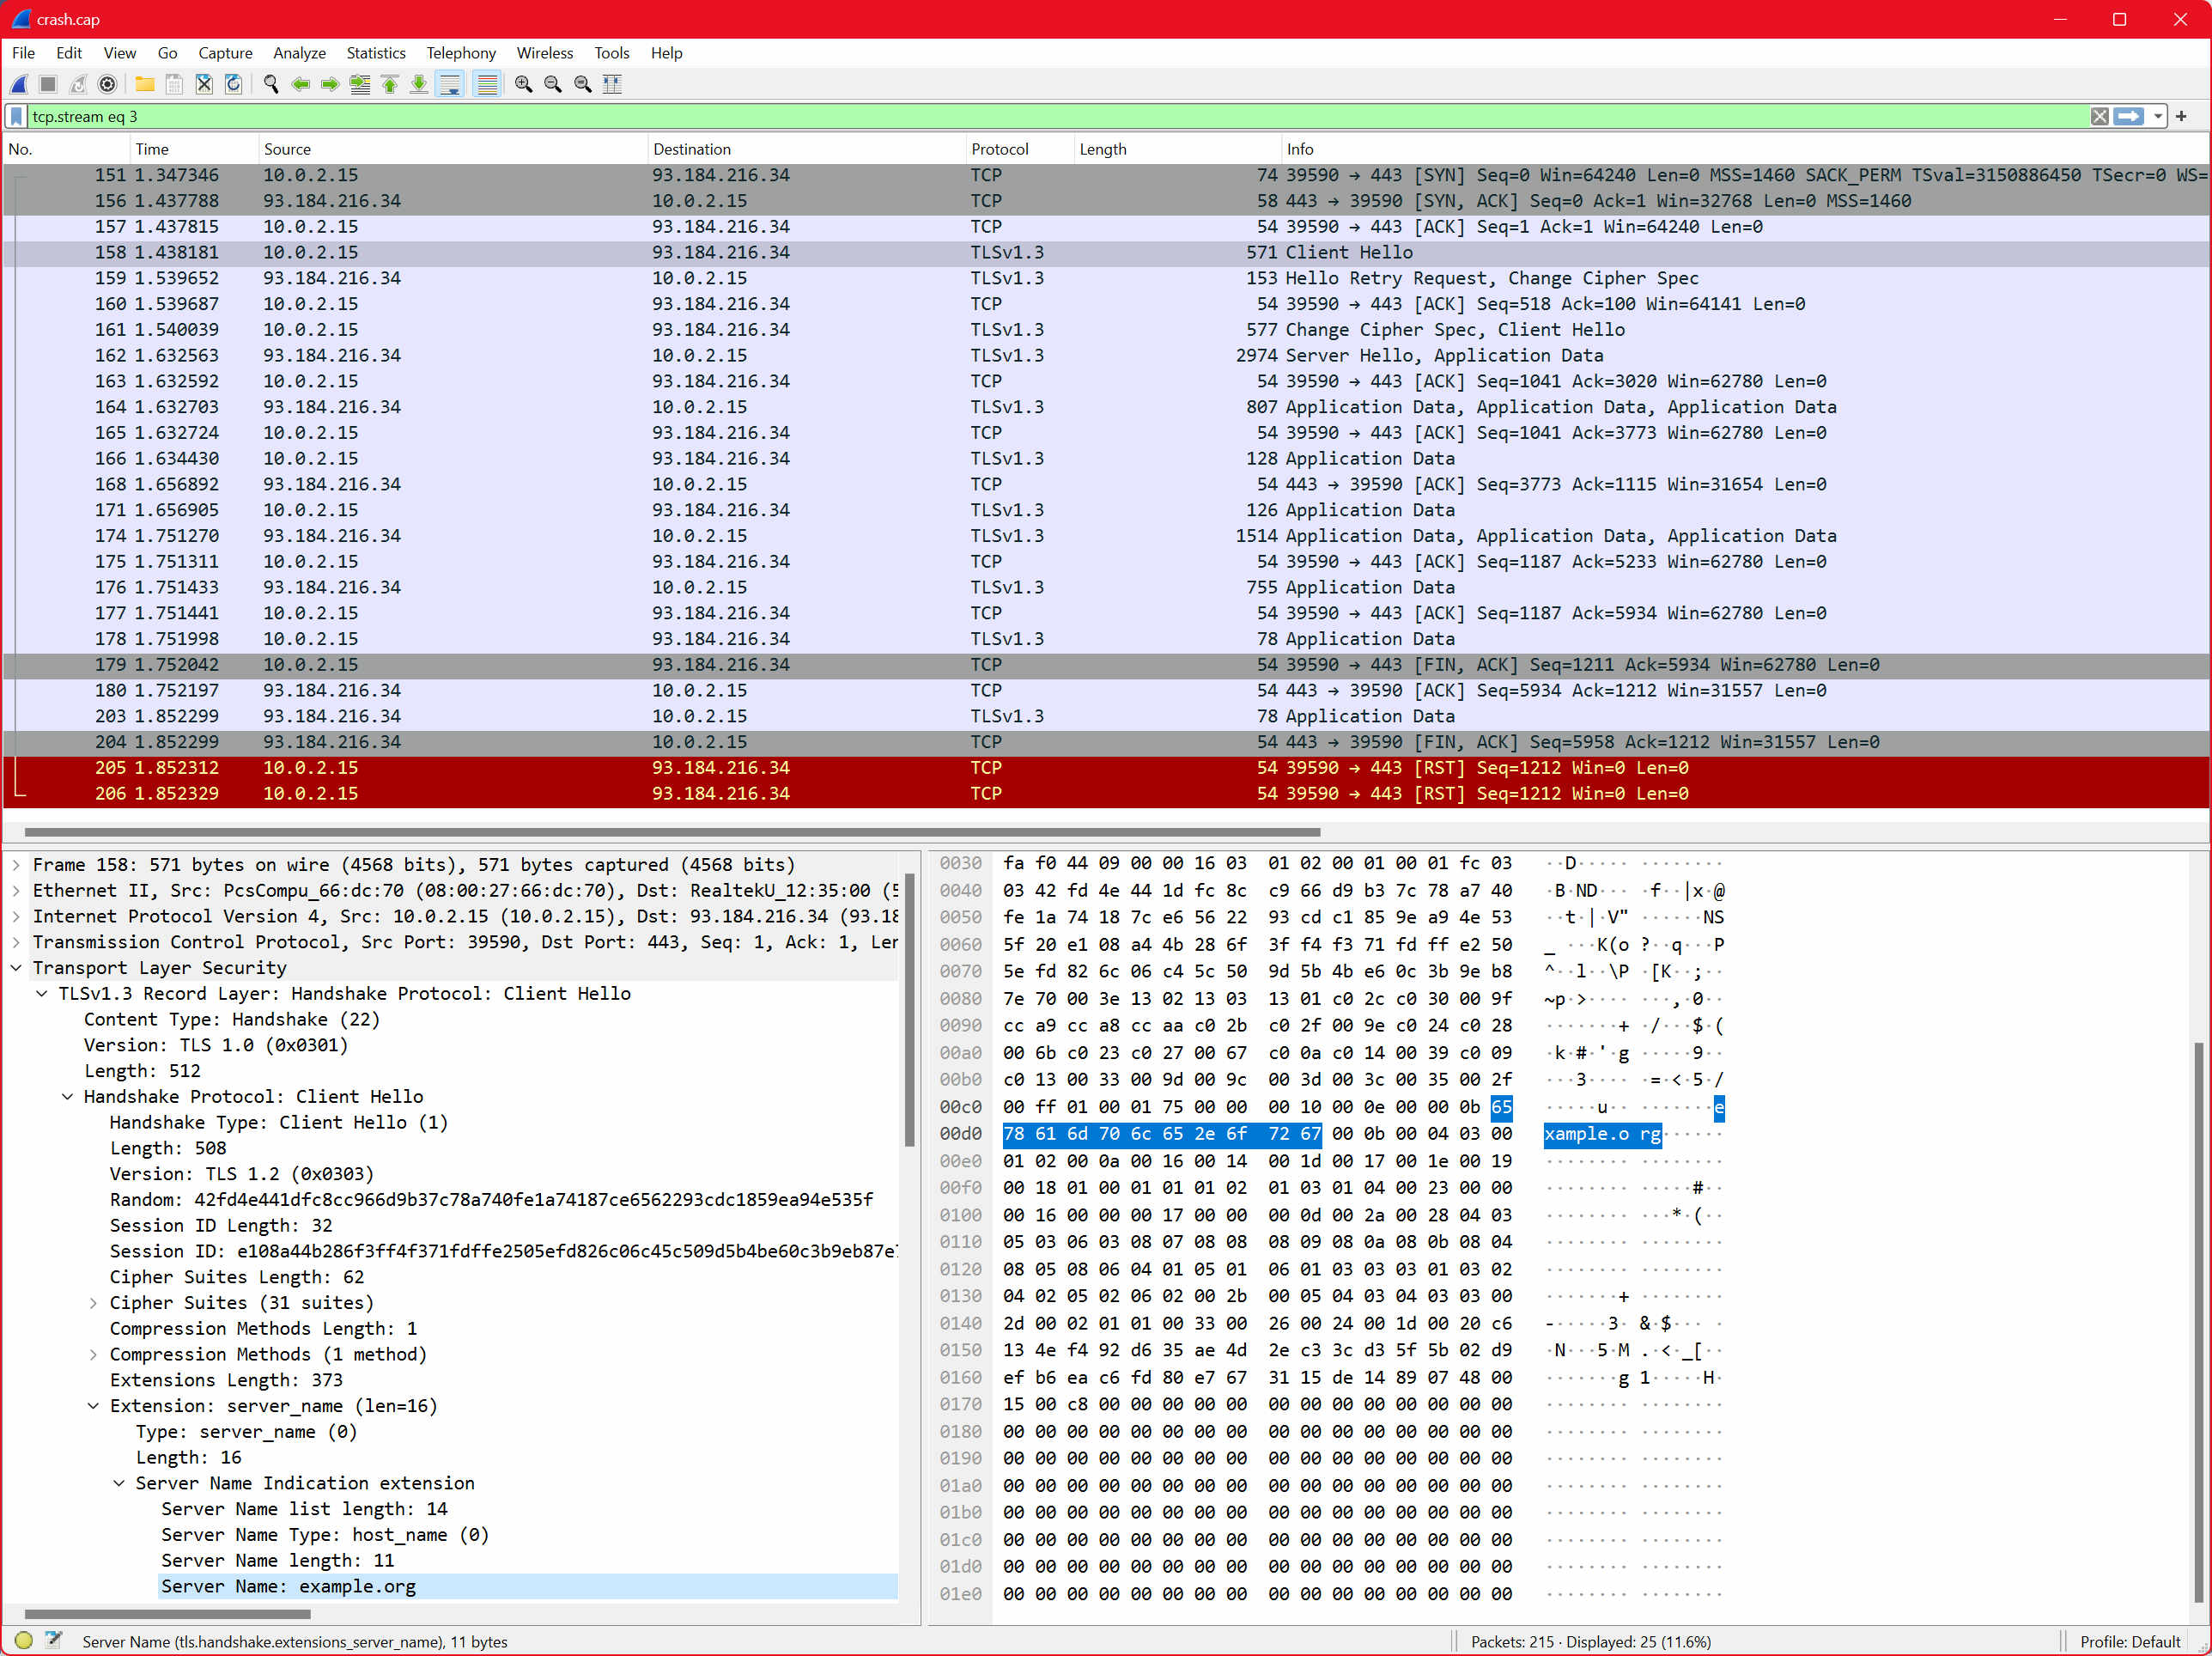 A TCP stream viewed in wireshark. The contents are explained in the next paragraph.